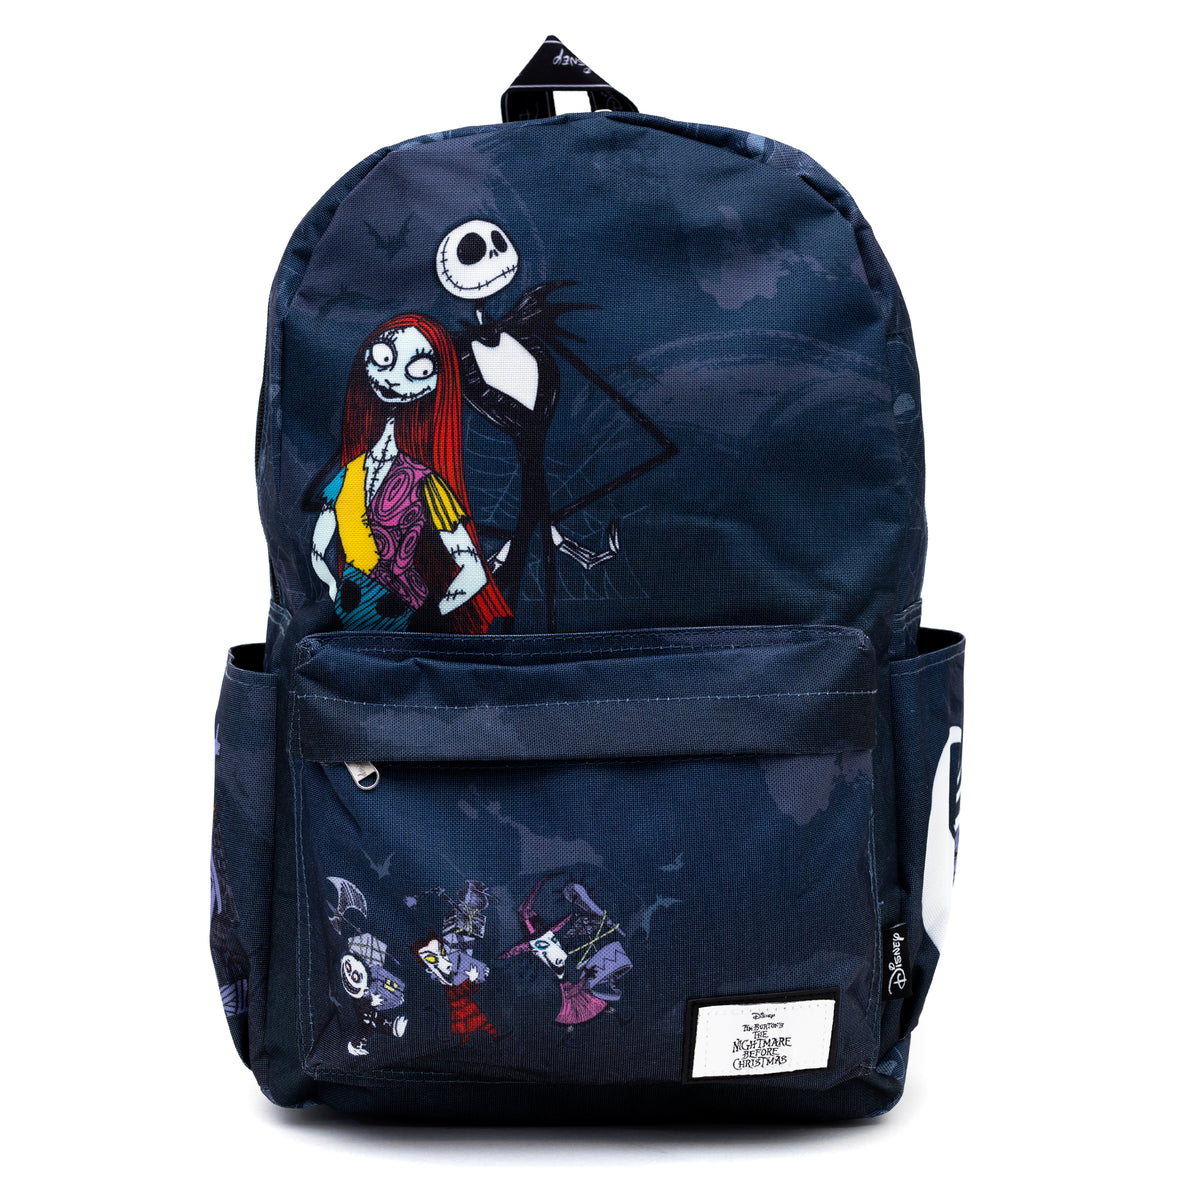 WondaPOP - The Nightmare Before Christmas Meant to Be 17" Full Size Nylon Backpack